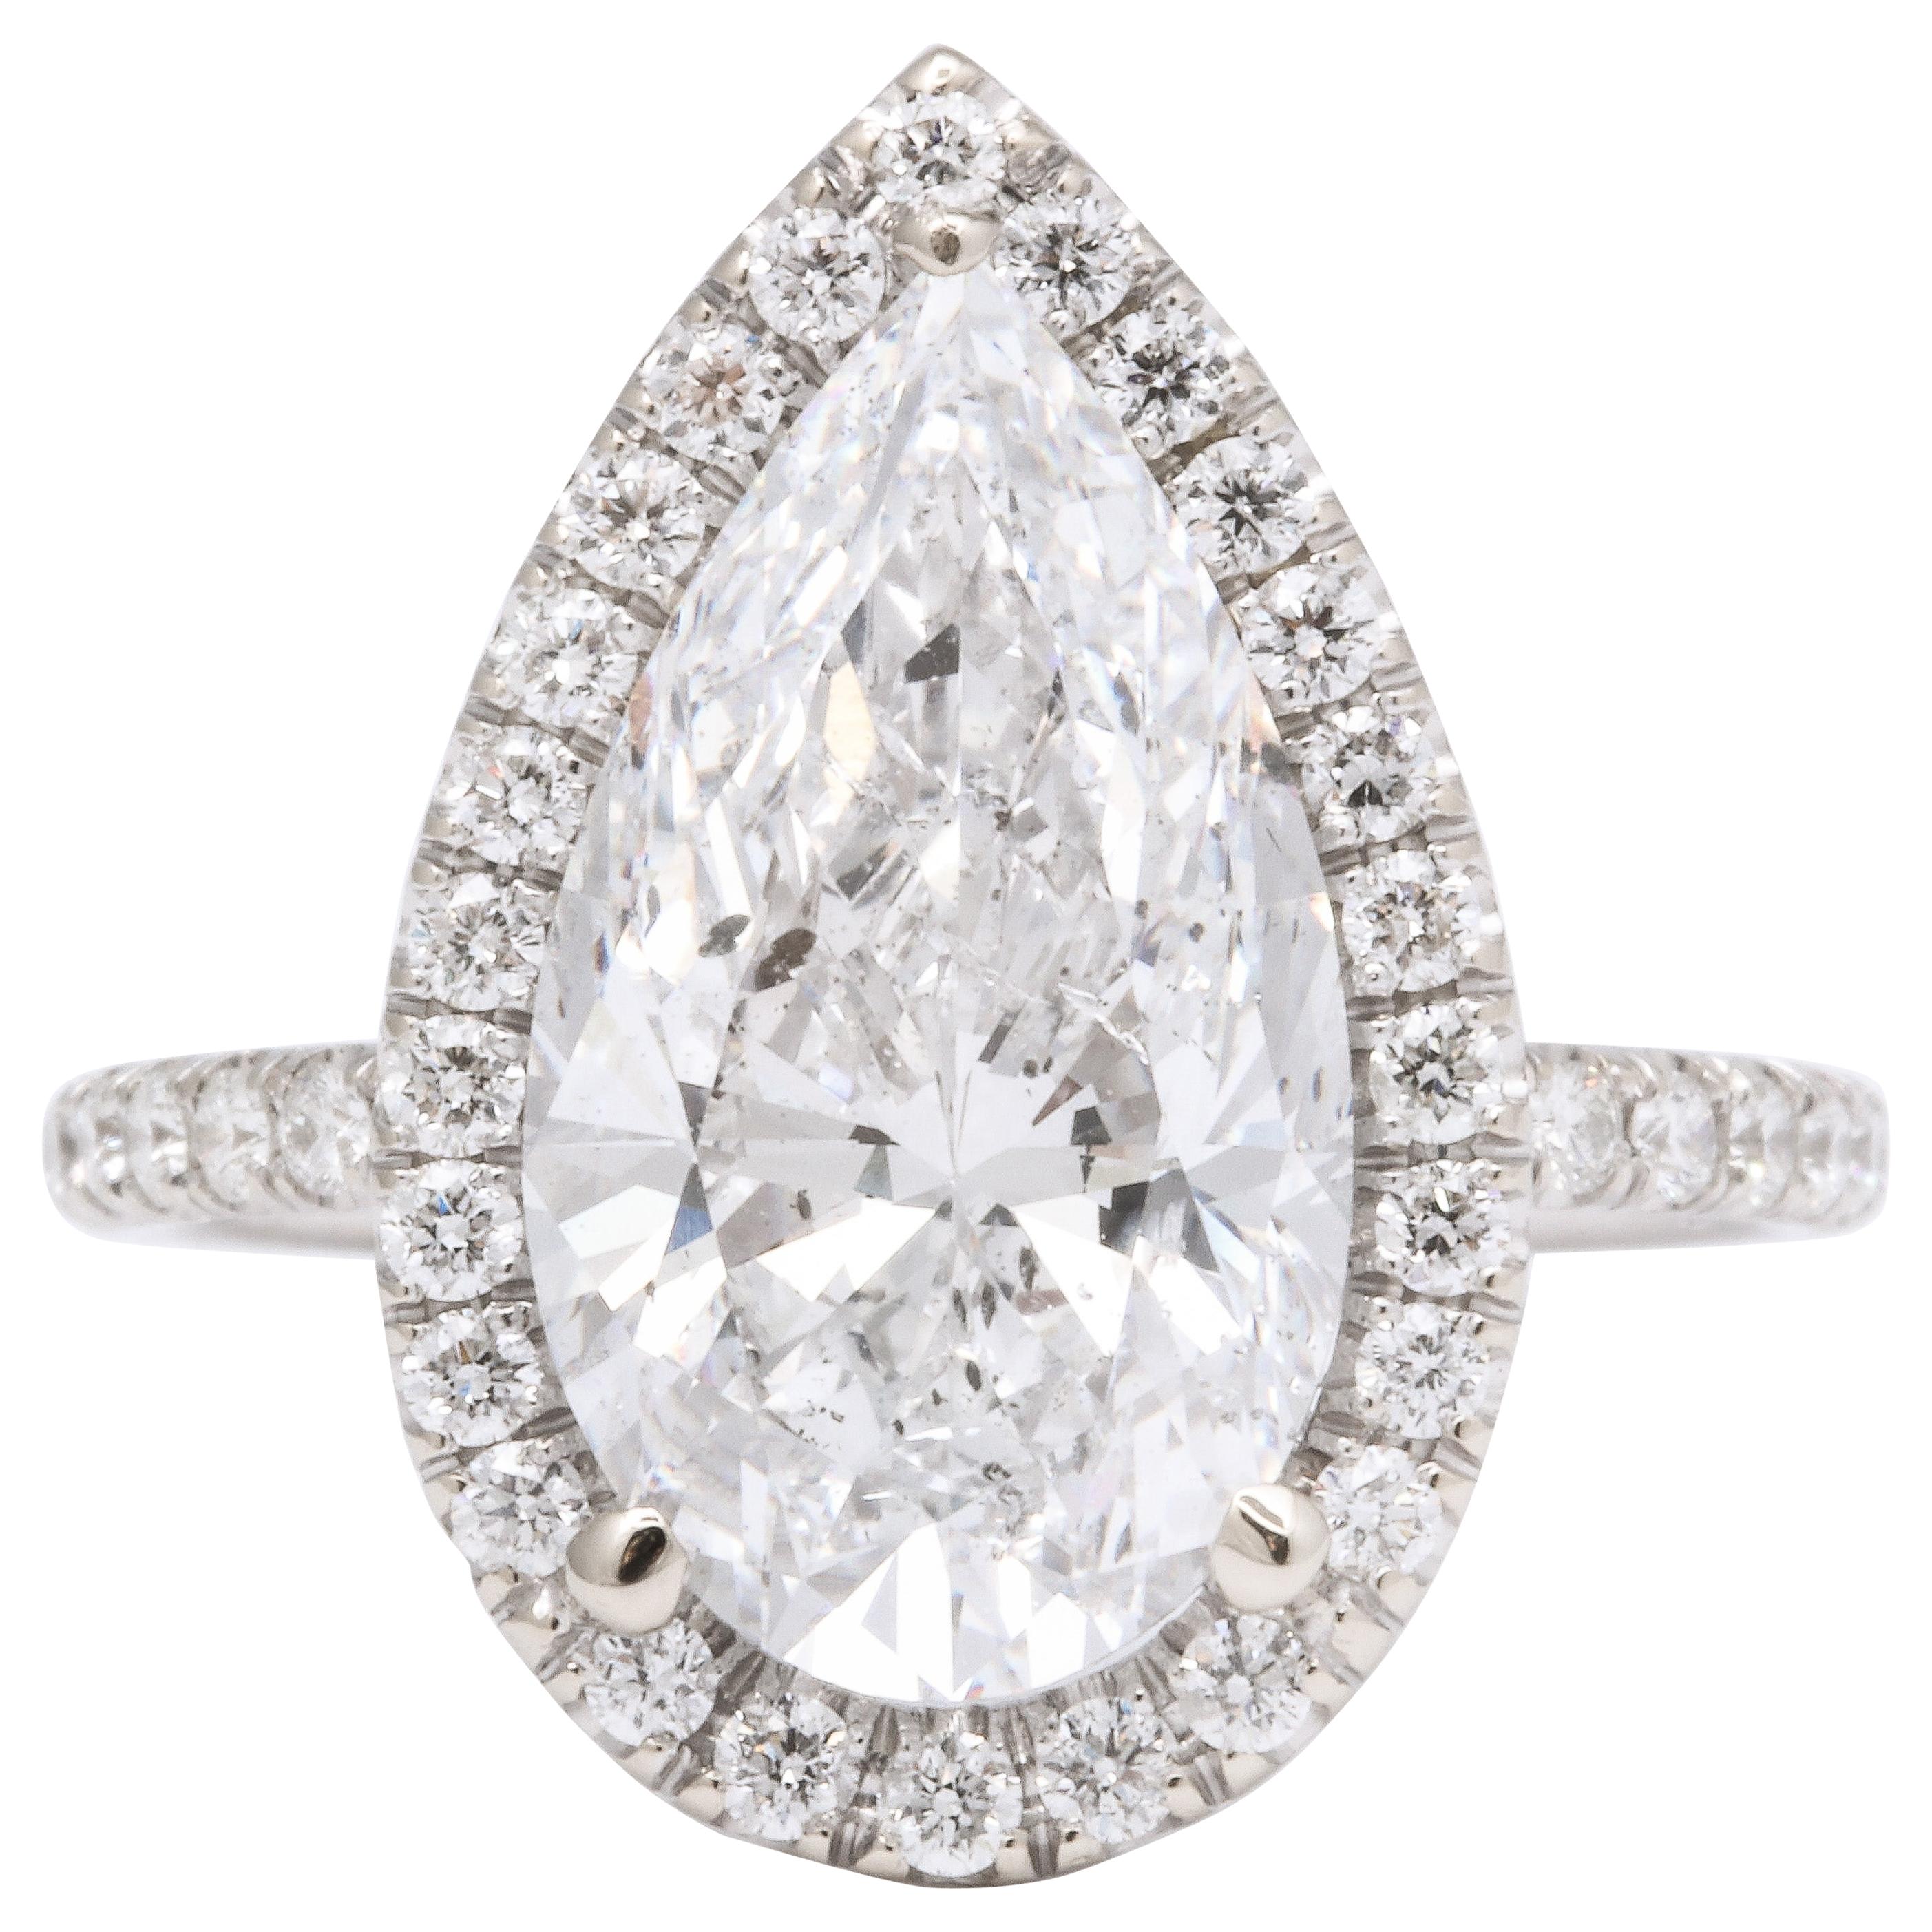 5 Carat D Color Pear Shape Engagement Ring GIA Certified